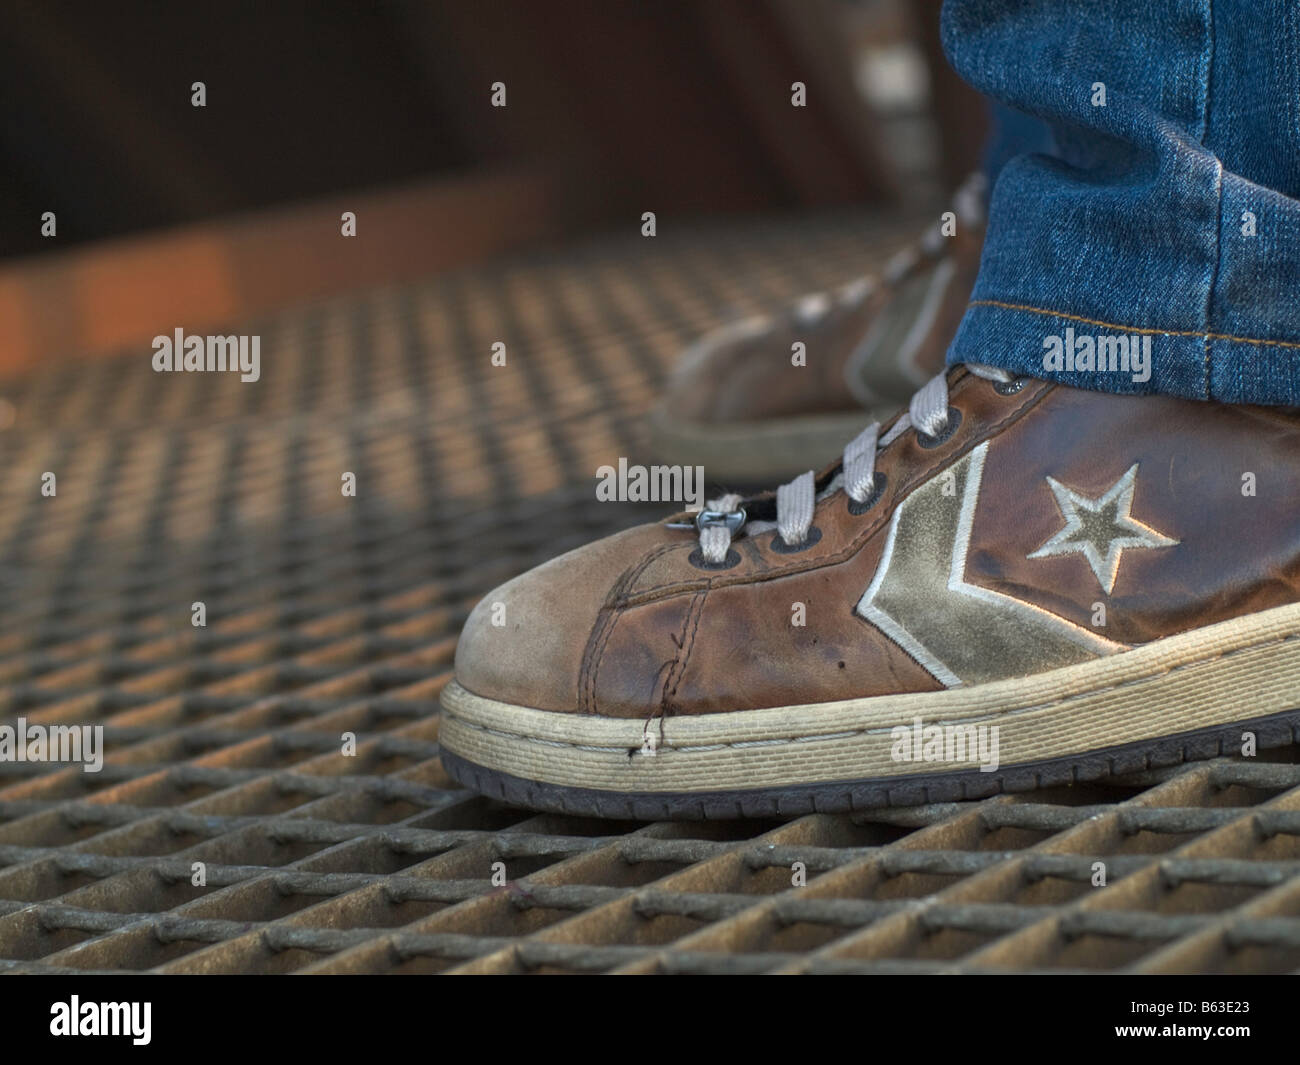 Feet in Converse sneakers standing on a iron grill. Stock Photo